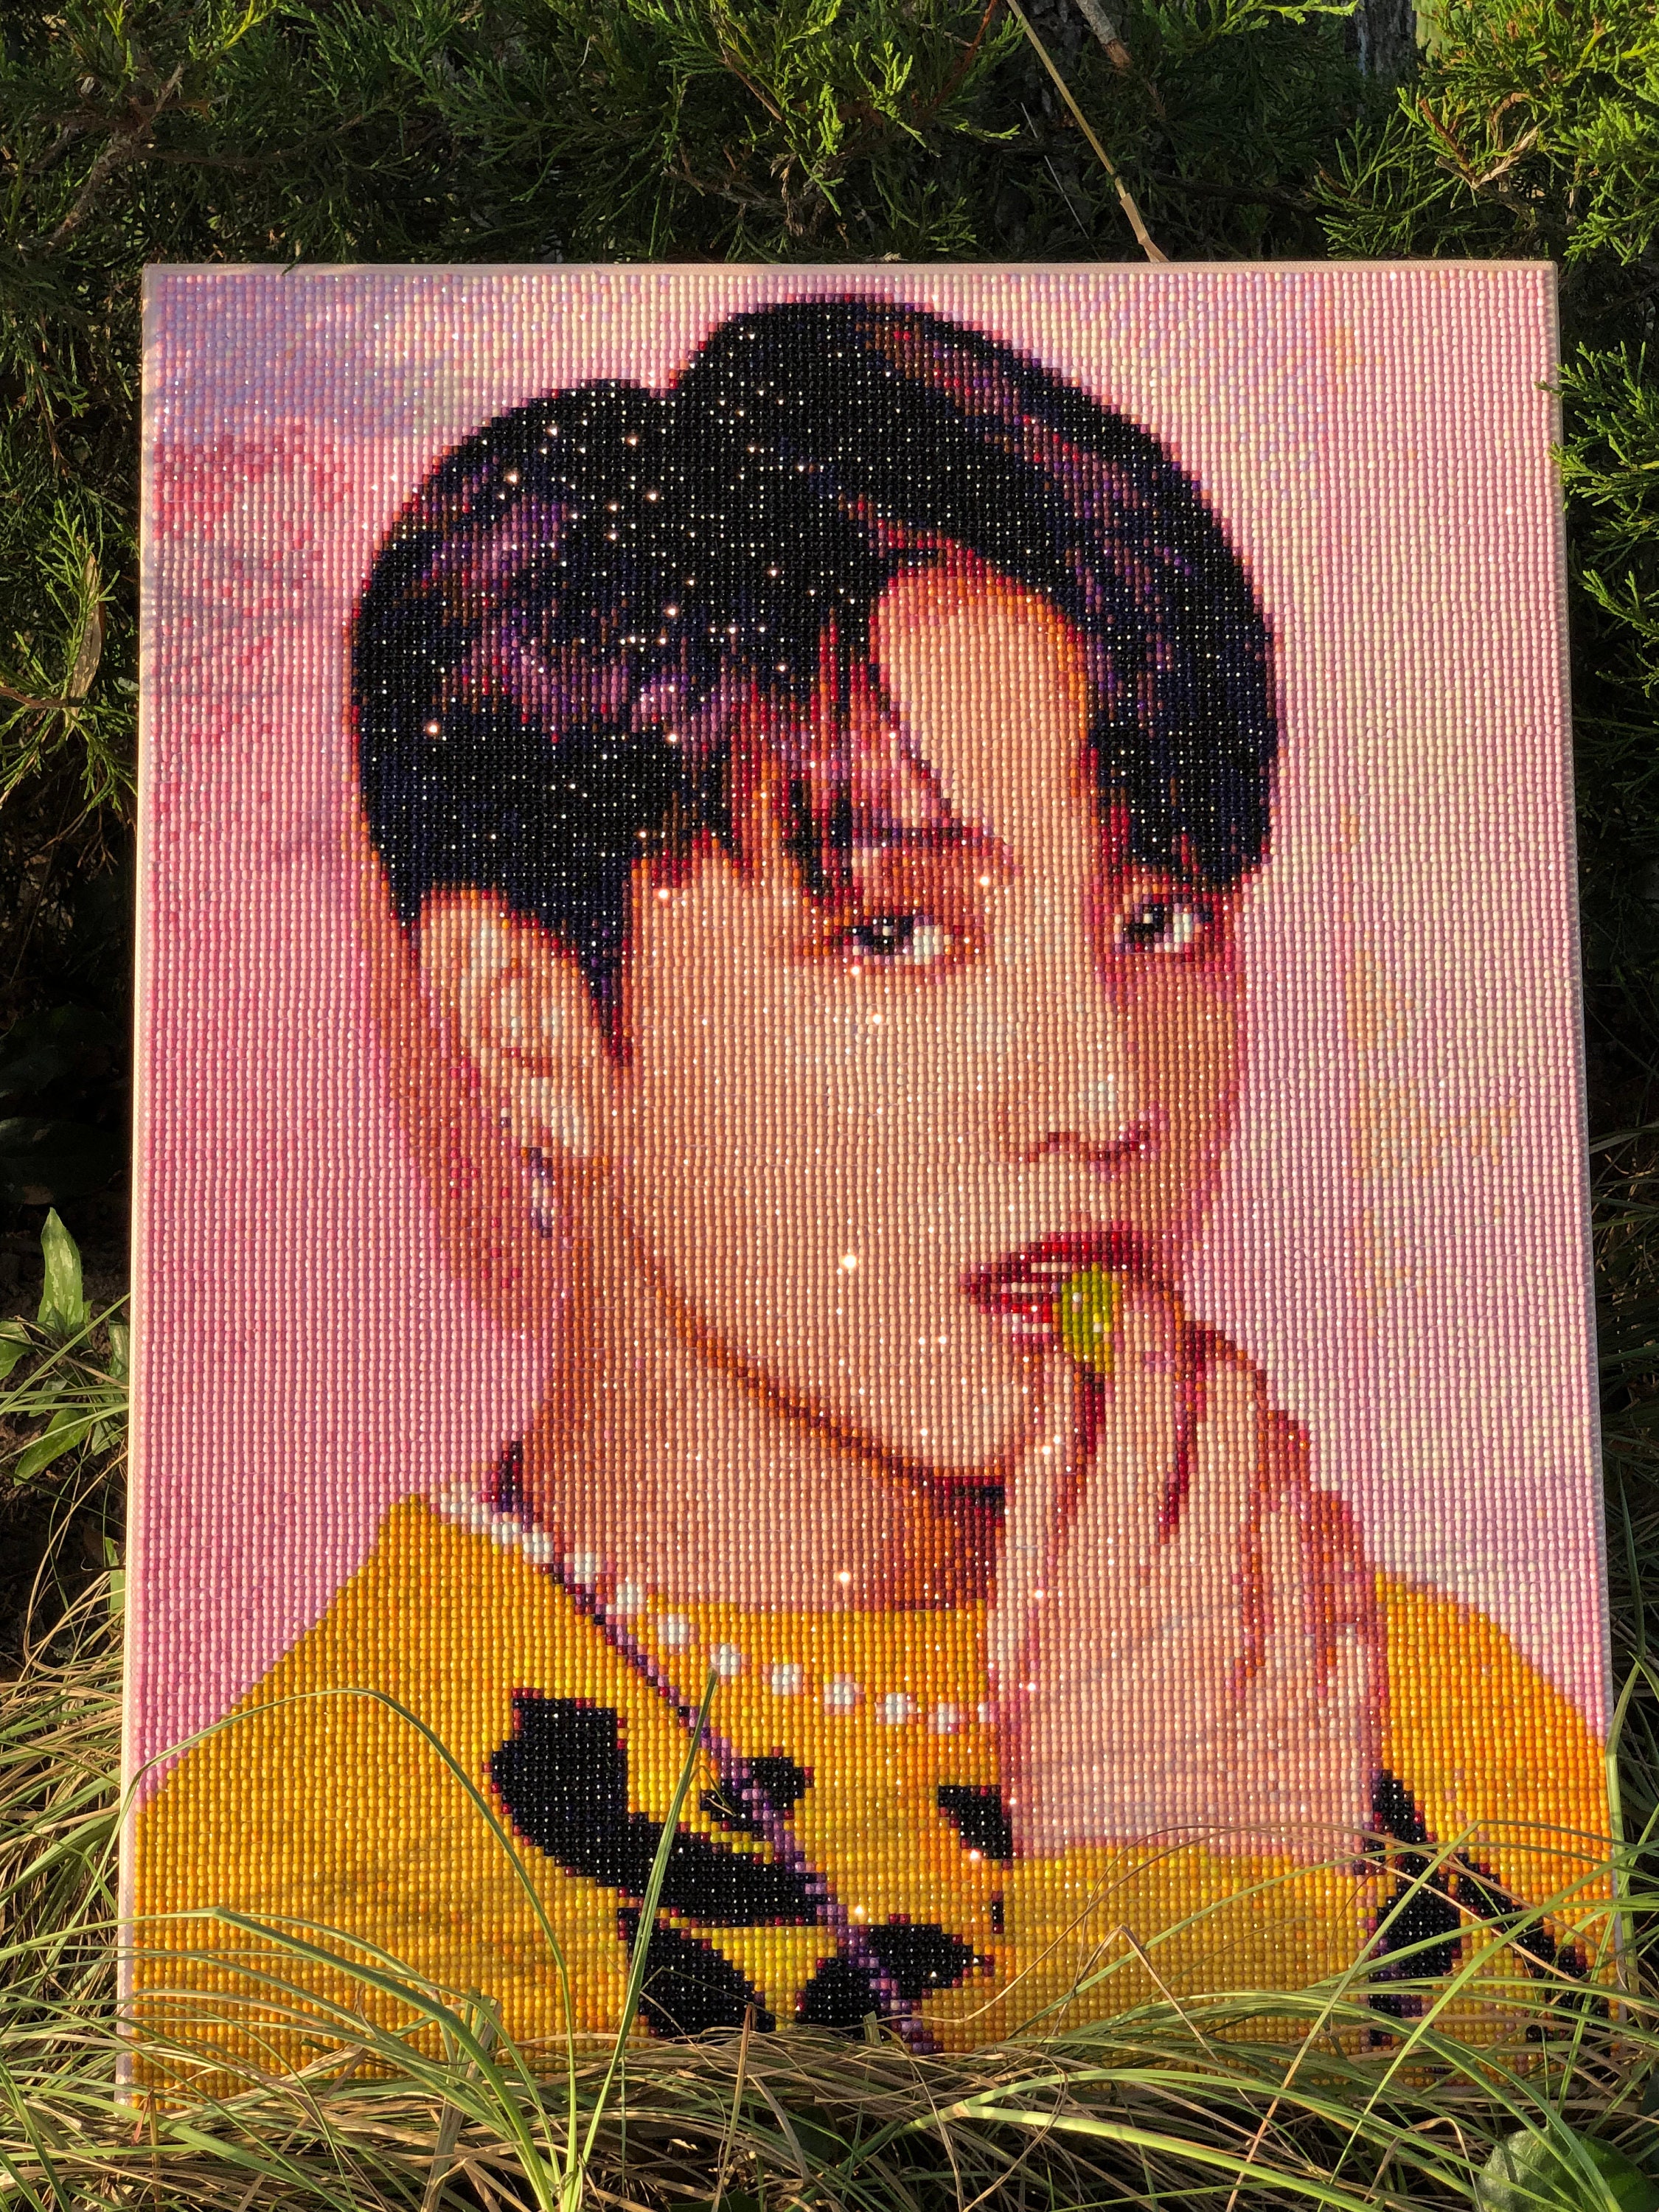 Jungkook from BTS Diamond Painting for Sale